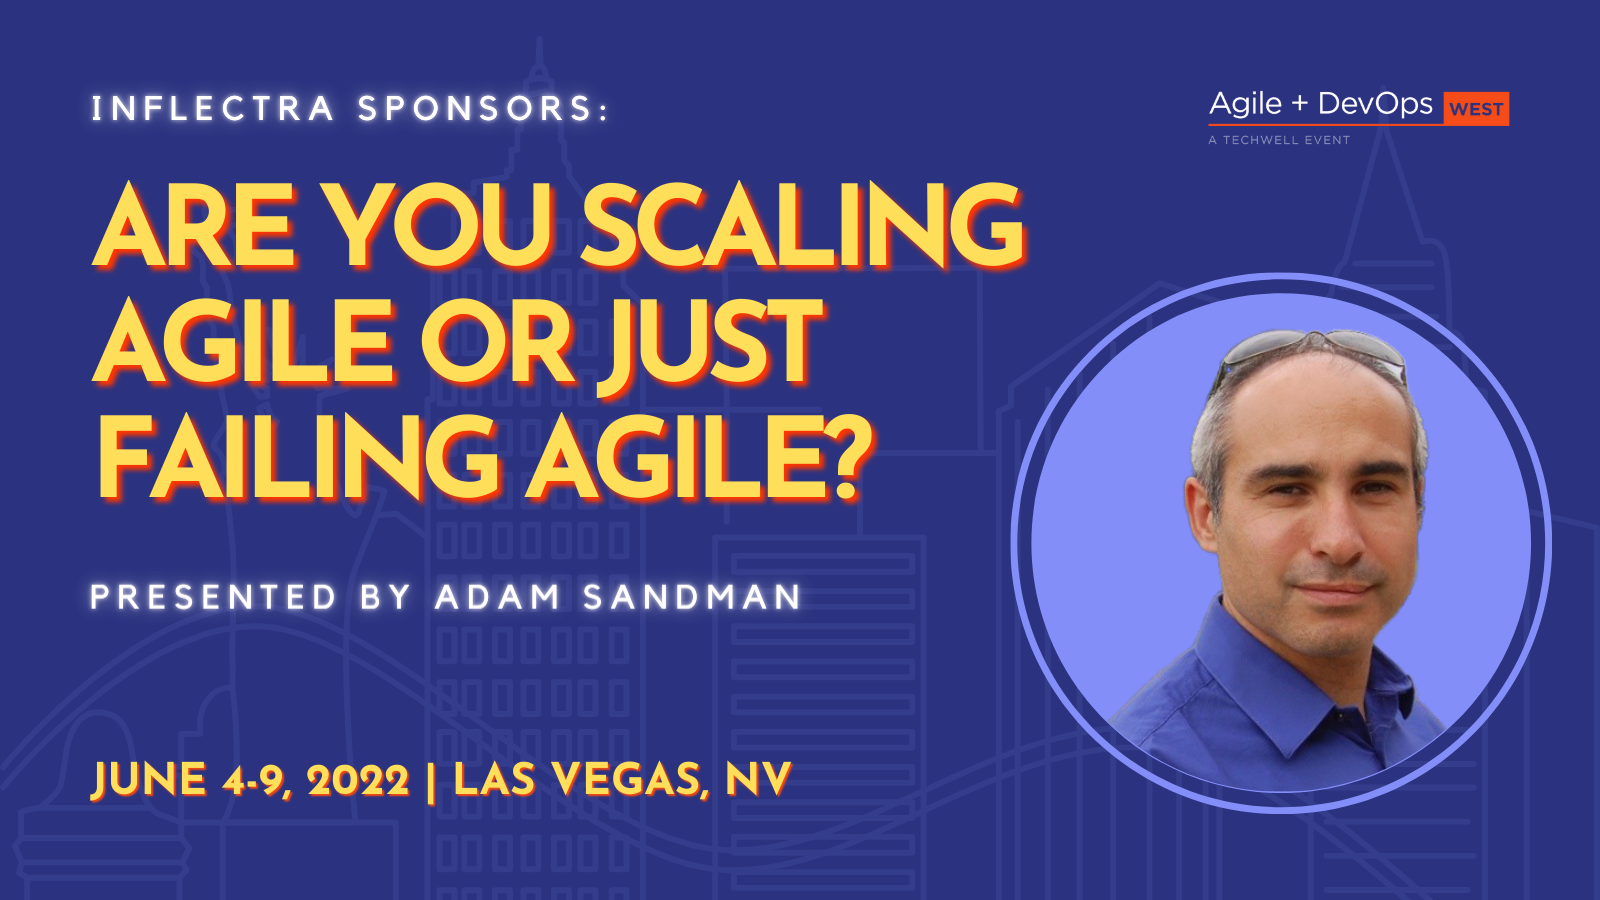 inflectra-sponsors-are-you-scaling-agile-or-just-failing-agile-by-adam-sandman-at-agile-devops-west-image